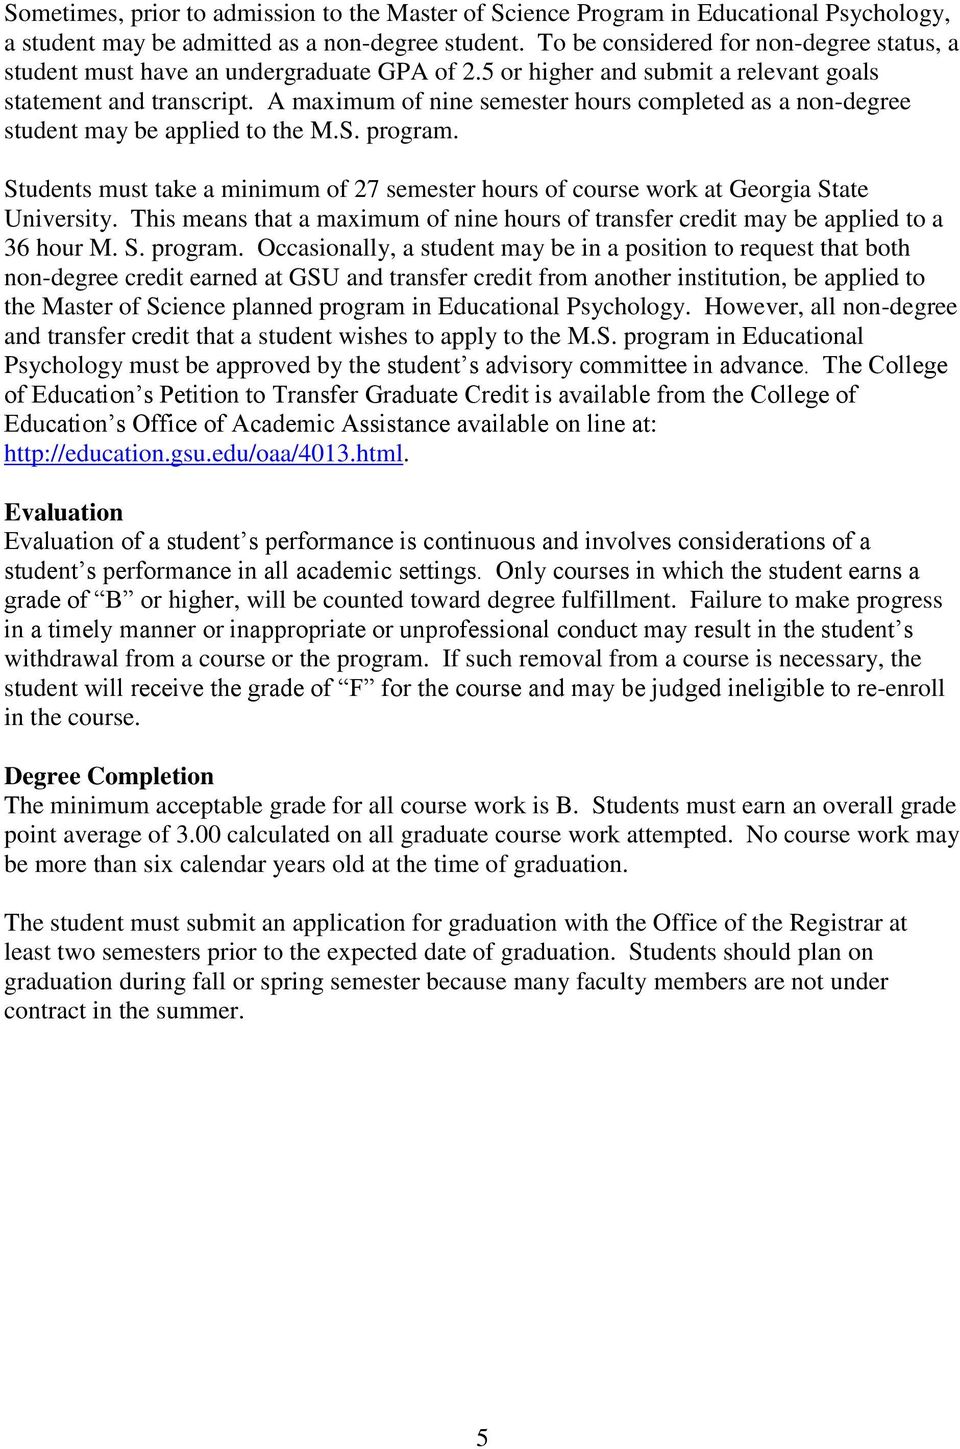 A maximum of nine semester hours completed as a non-degree student may be applied to the M.S. program. Students must take a minimum of 27 semester hours of course work at Georgia State University.